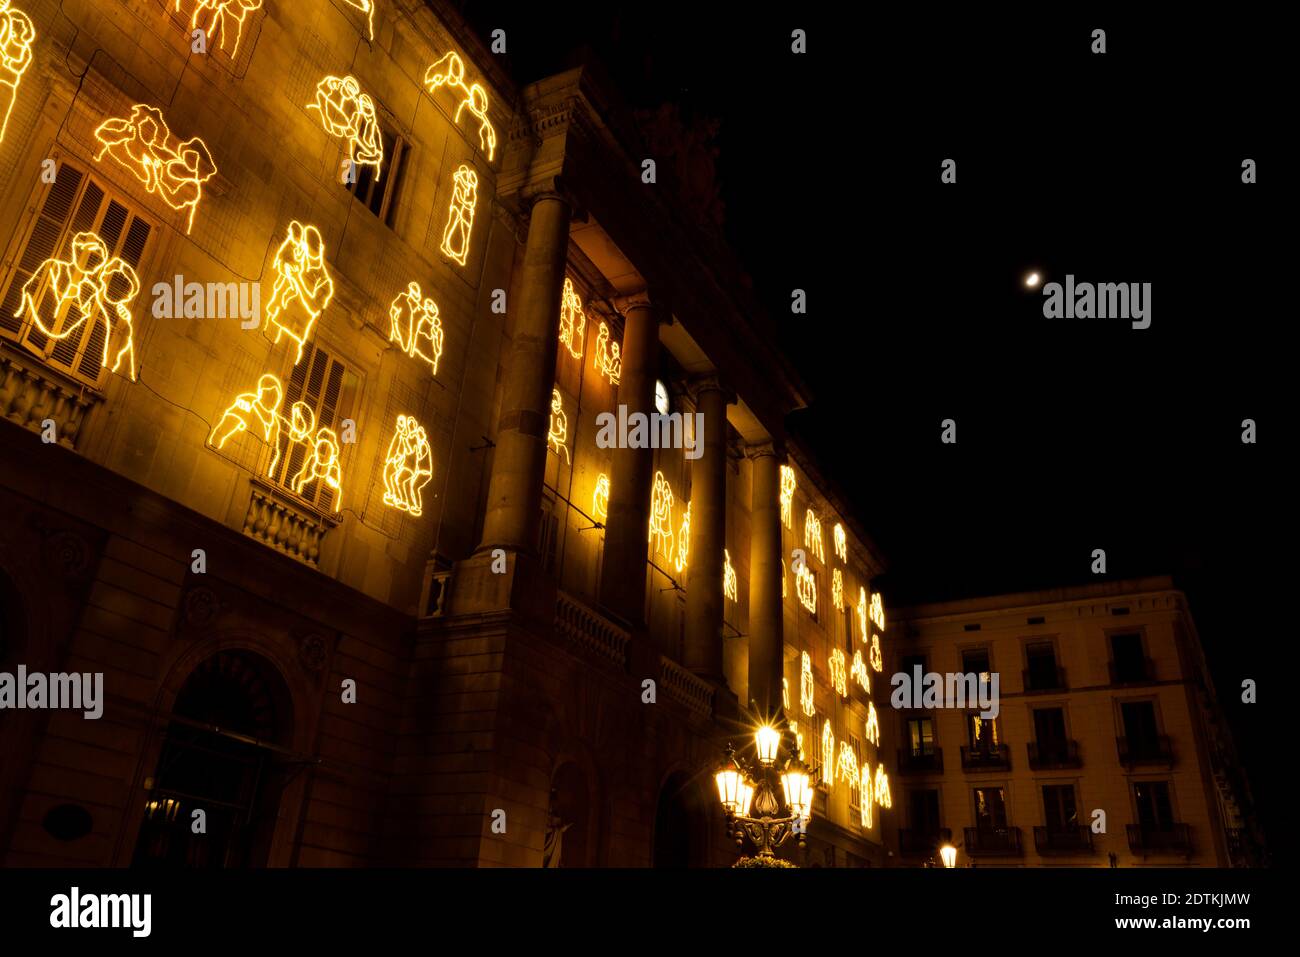 barcelona, spain - 21 december 2020: christmas time in barcelona plaza sant jaume at night with town hall mall with christmas lights before night curf Stock Photo